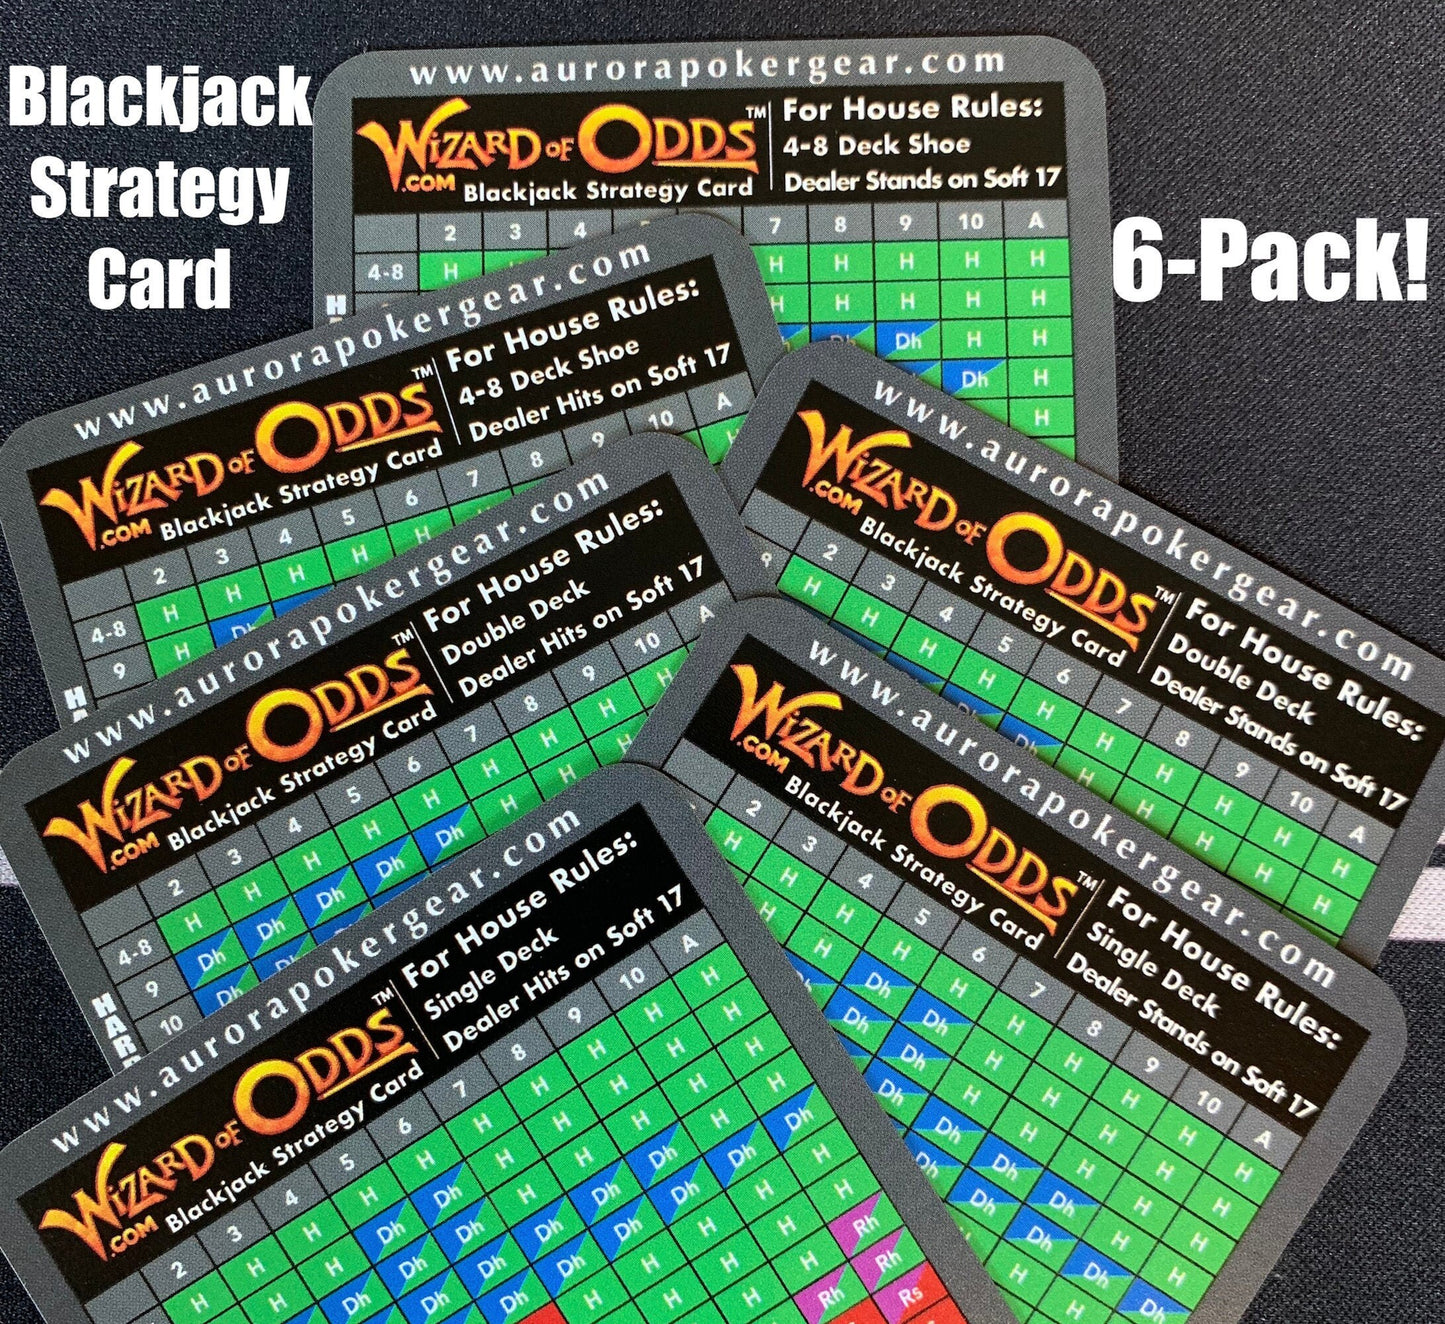 Wizard of Odds Blackjack Strategy Cards - 6-Pack!